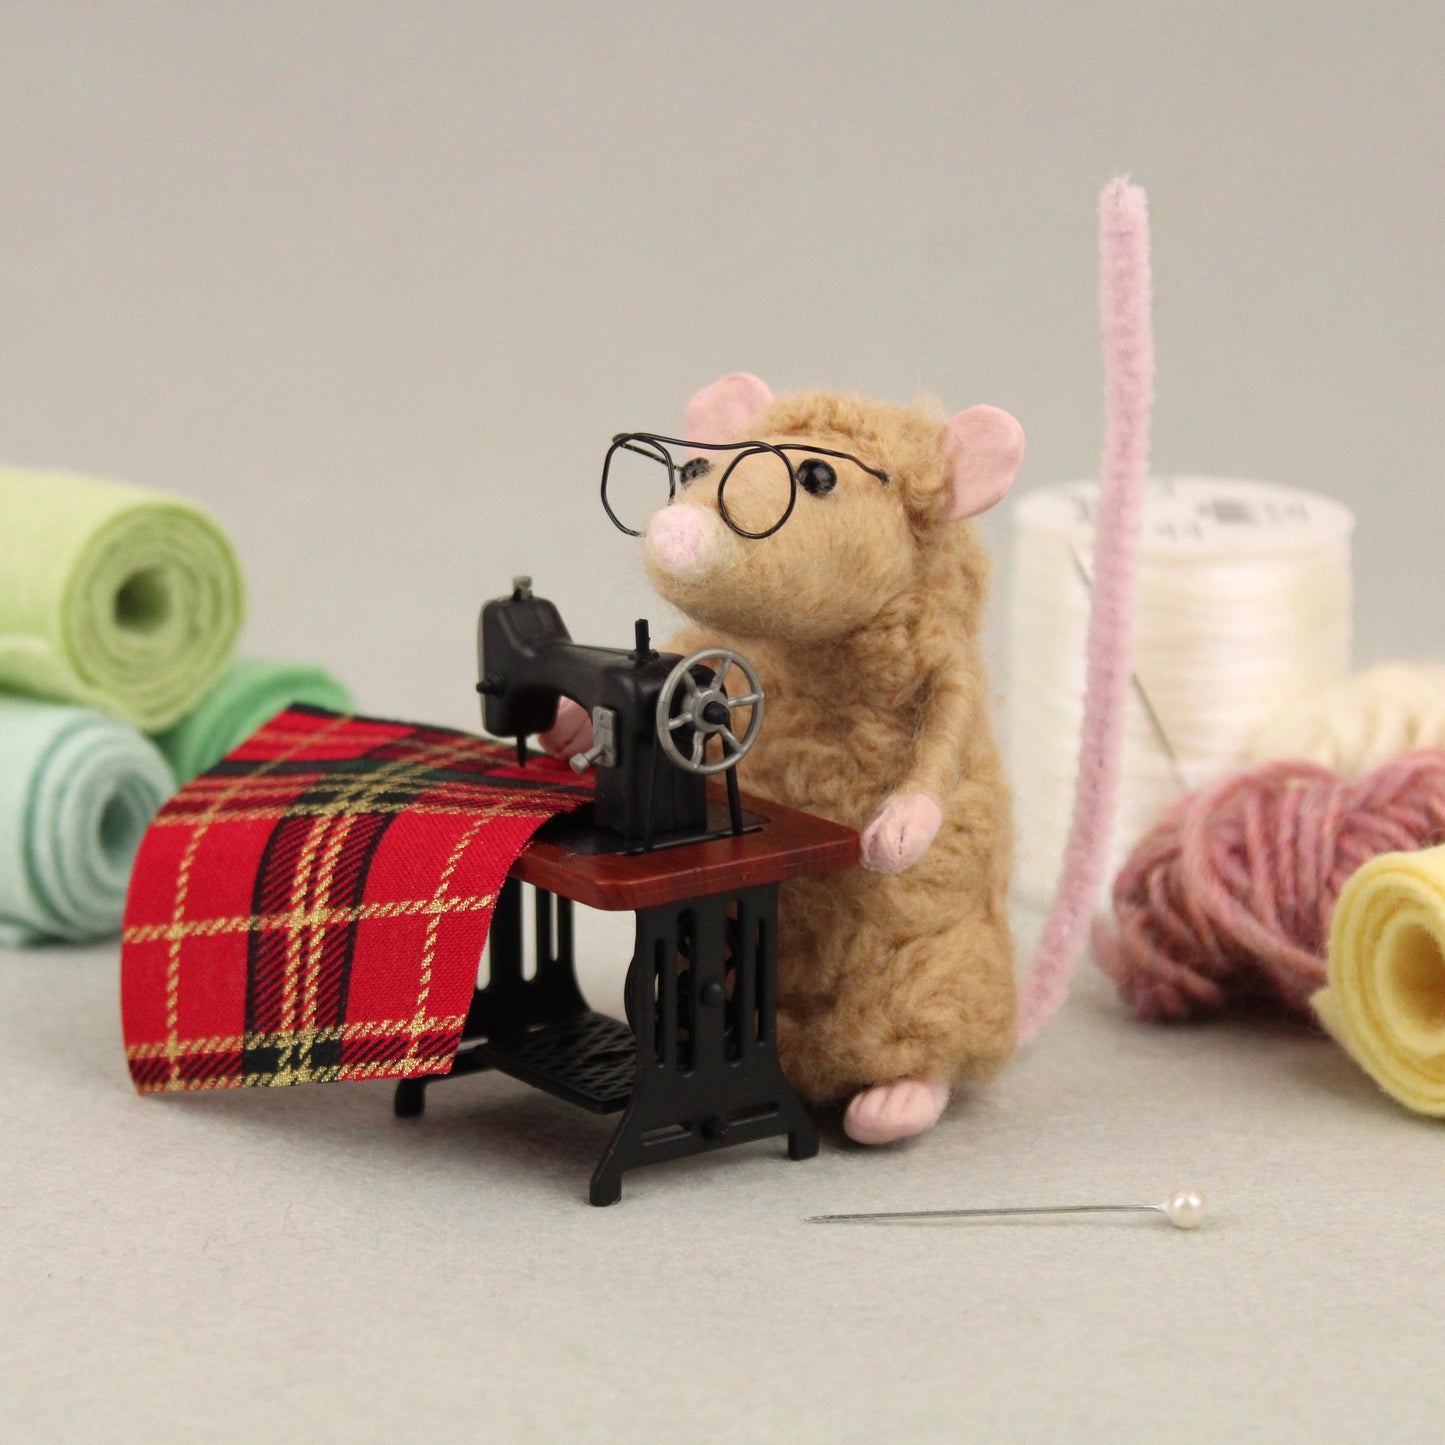 Sewing Mouse Small Needle Felt Kit - The Makerss